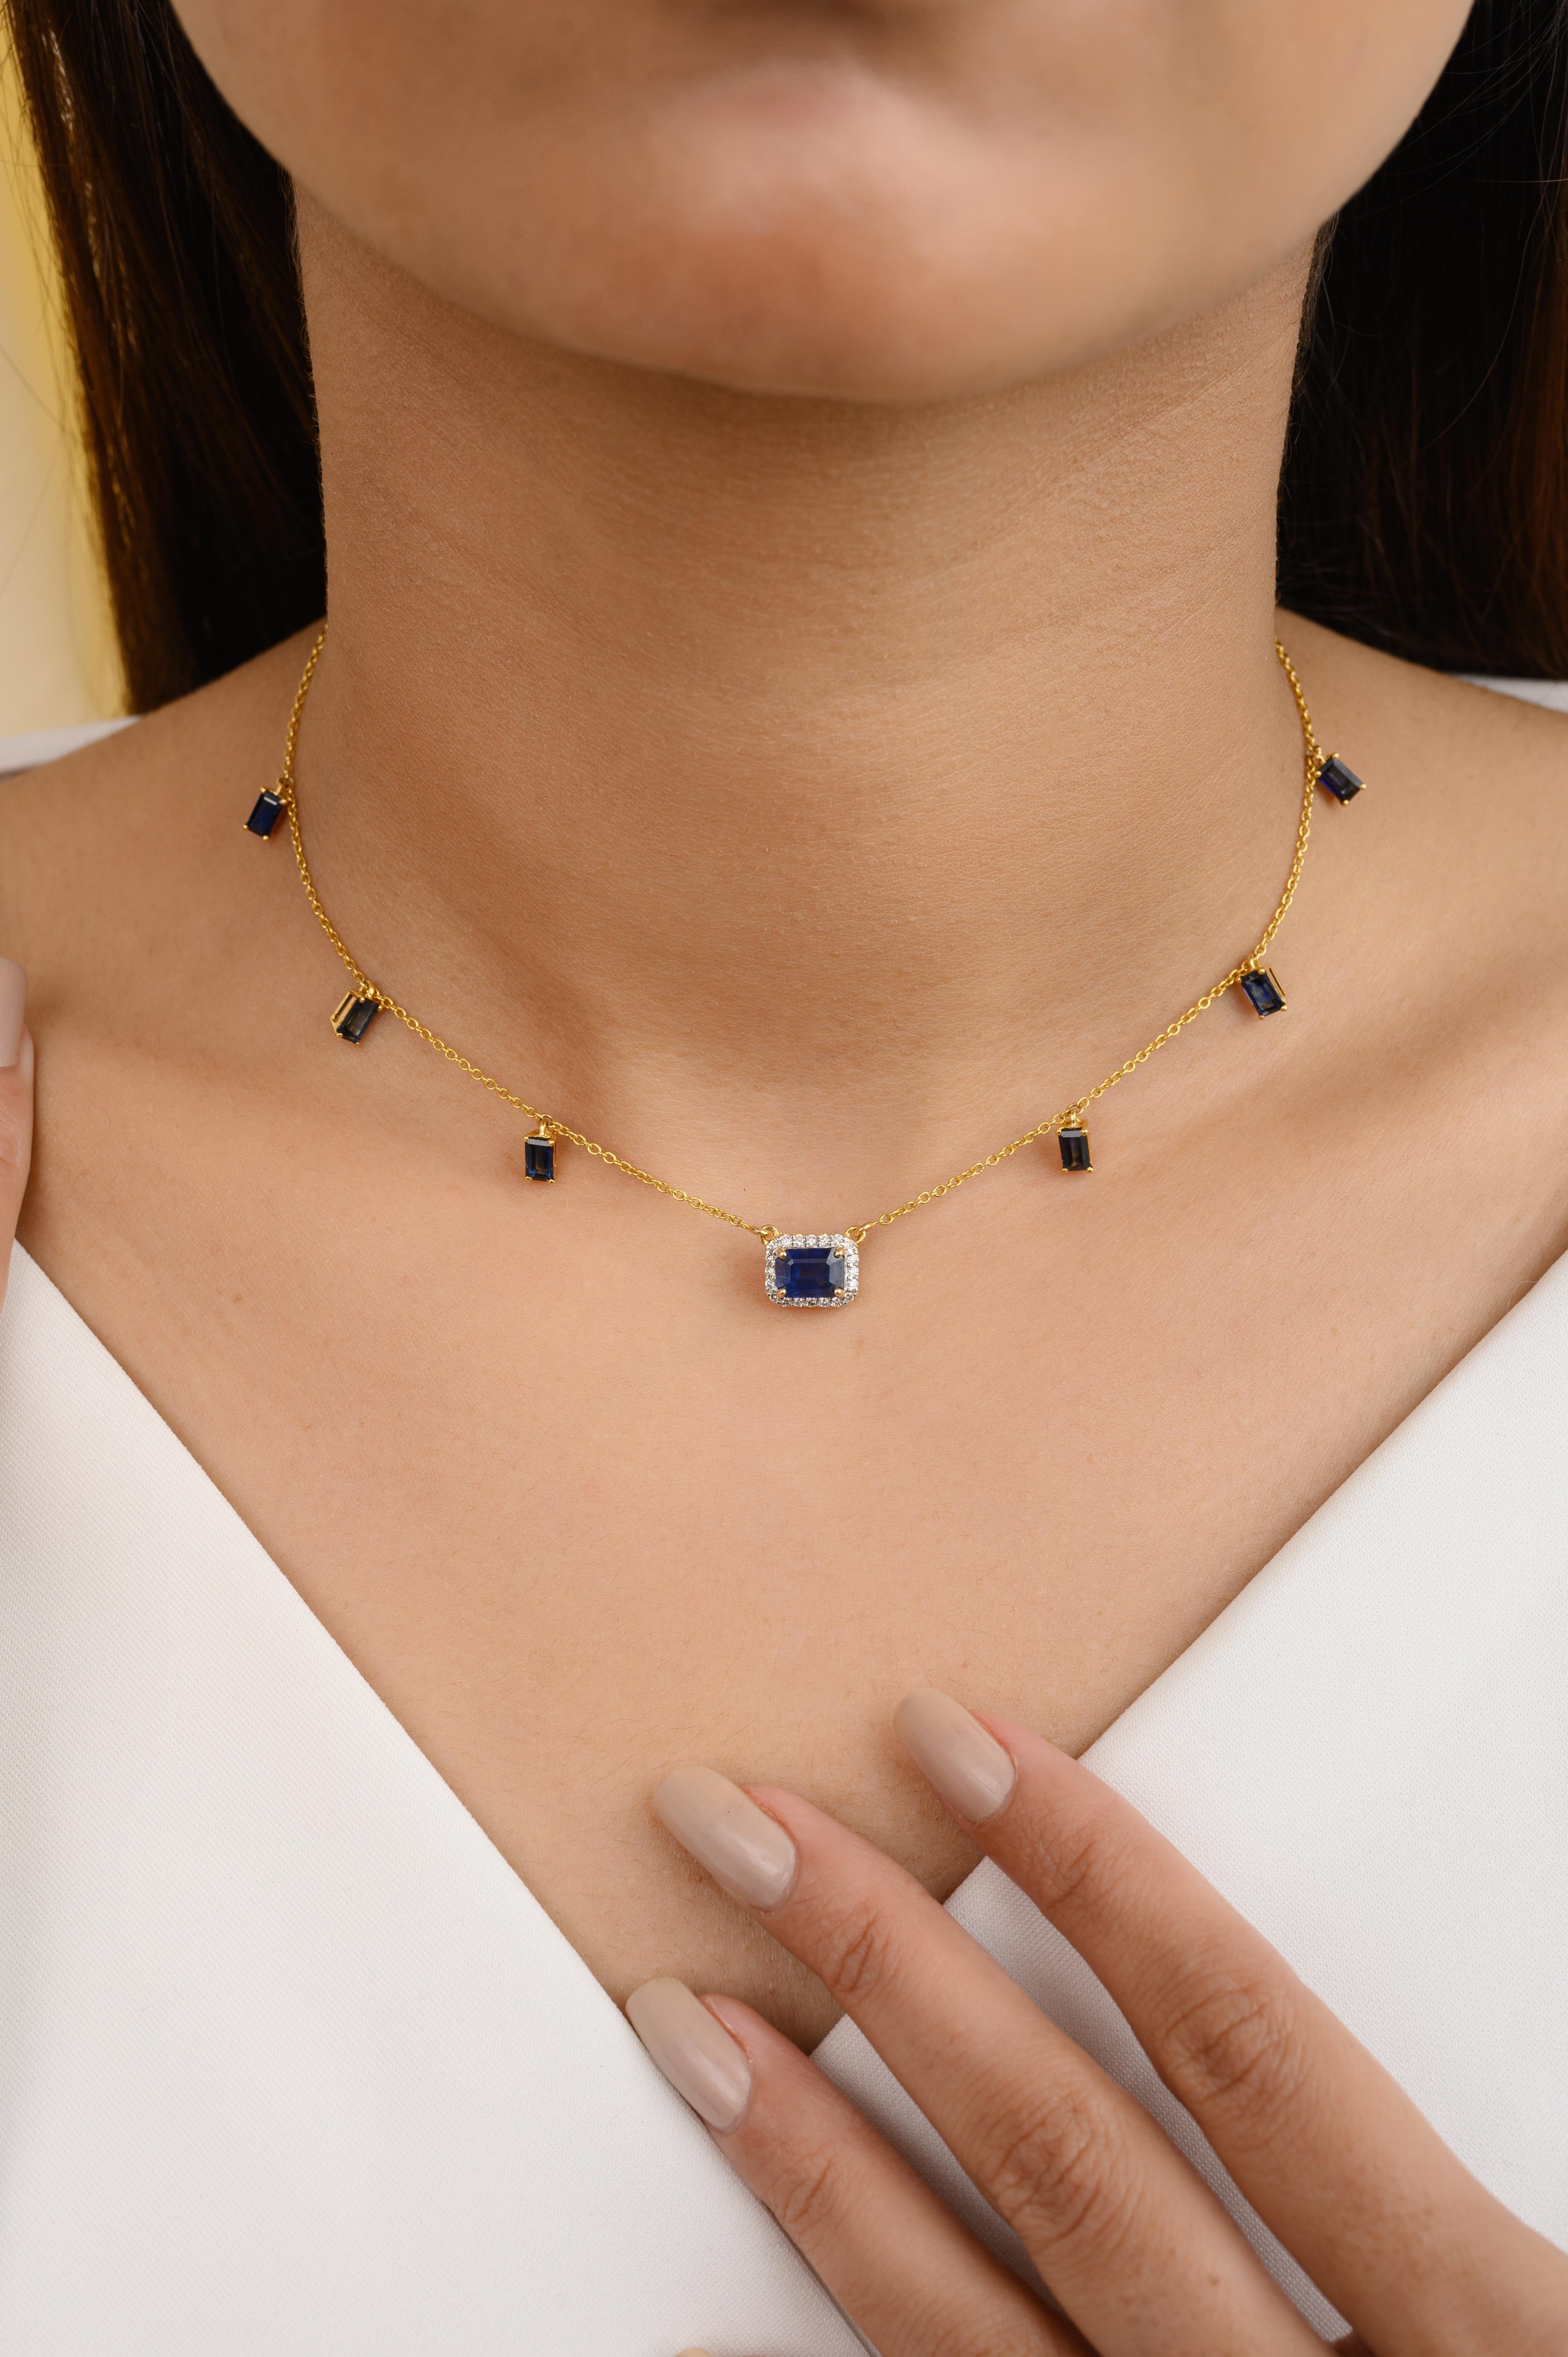 Dangling Blue Sapphire Diamond 14k Yellow Gold Chain Necklace Gift for Her For Sale 1